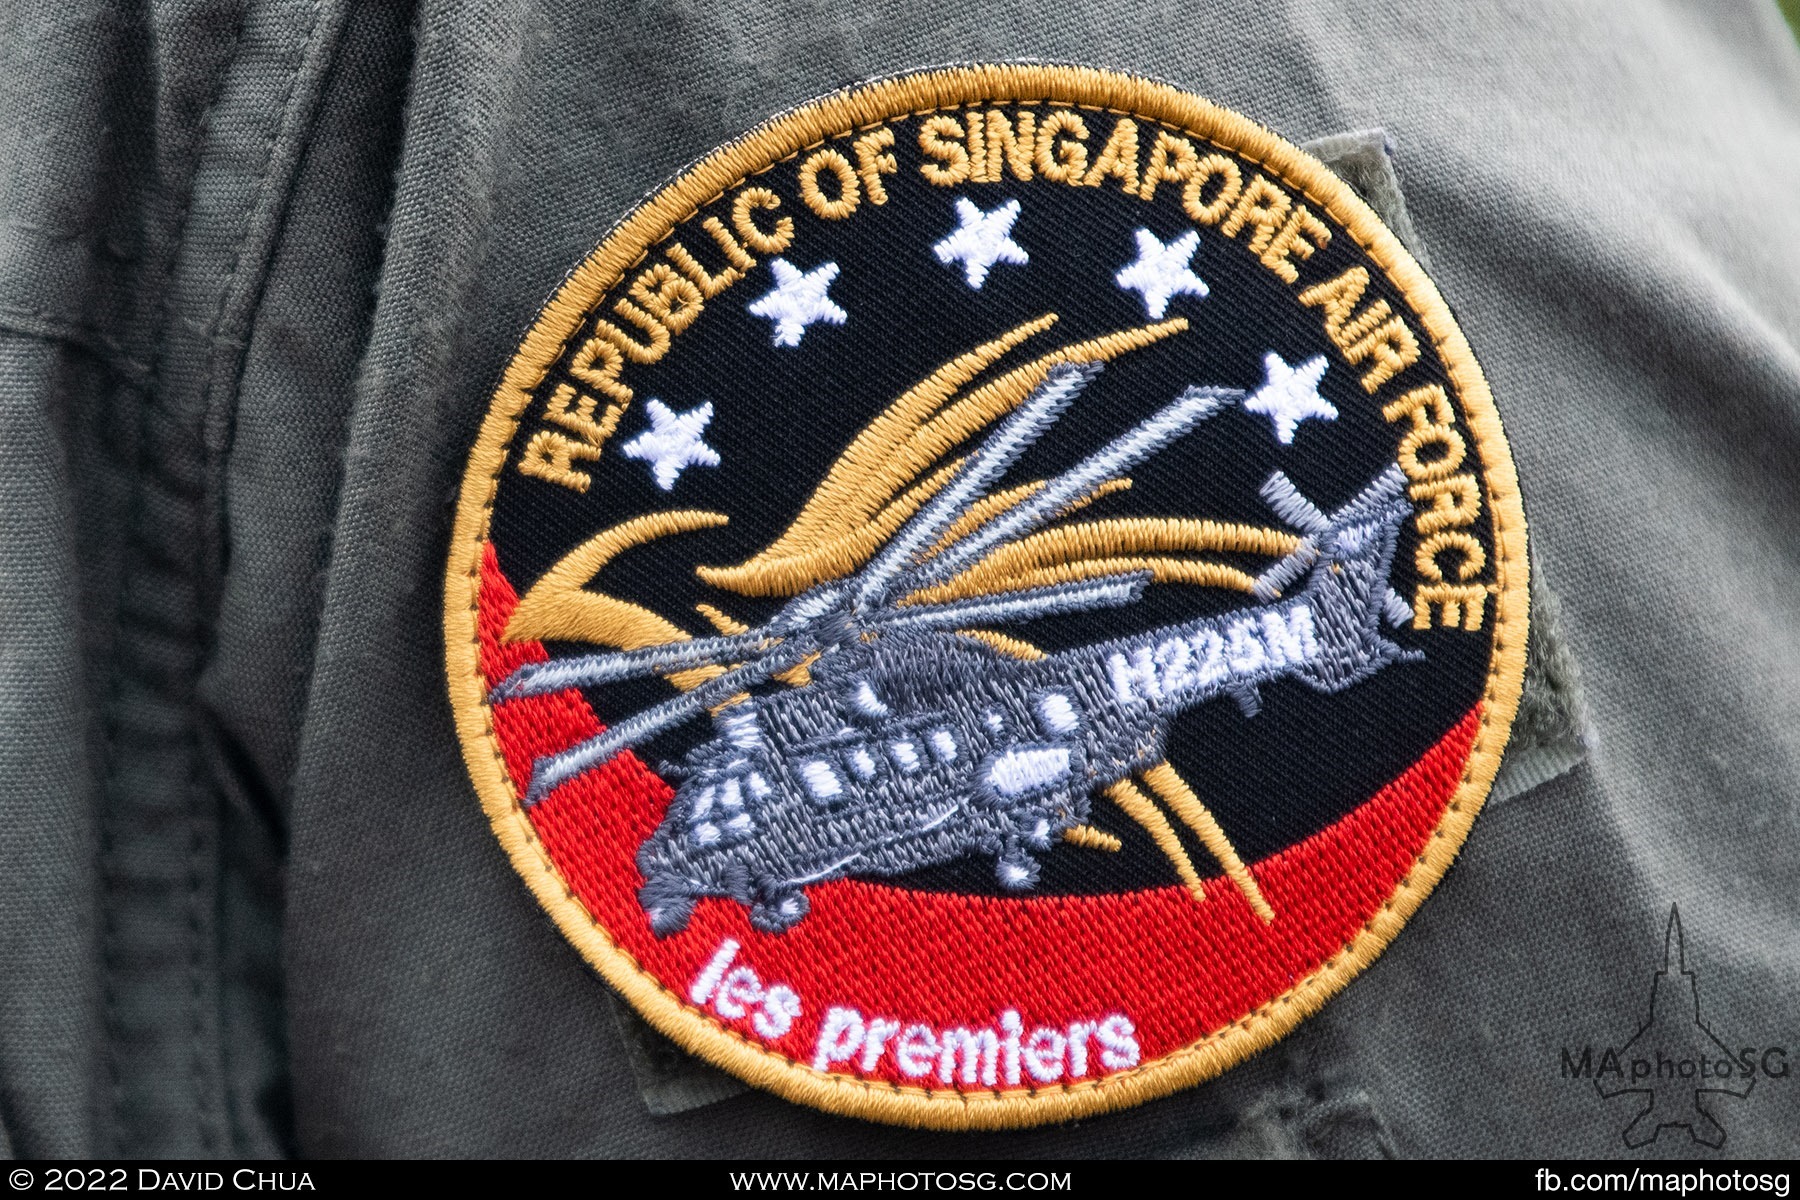 Patch worn by the RSAF H225M aircrew manning the static display